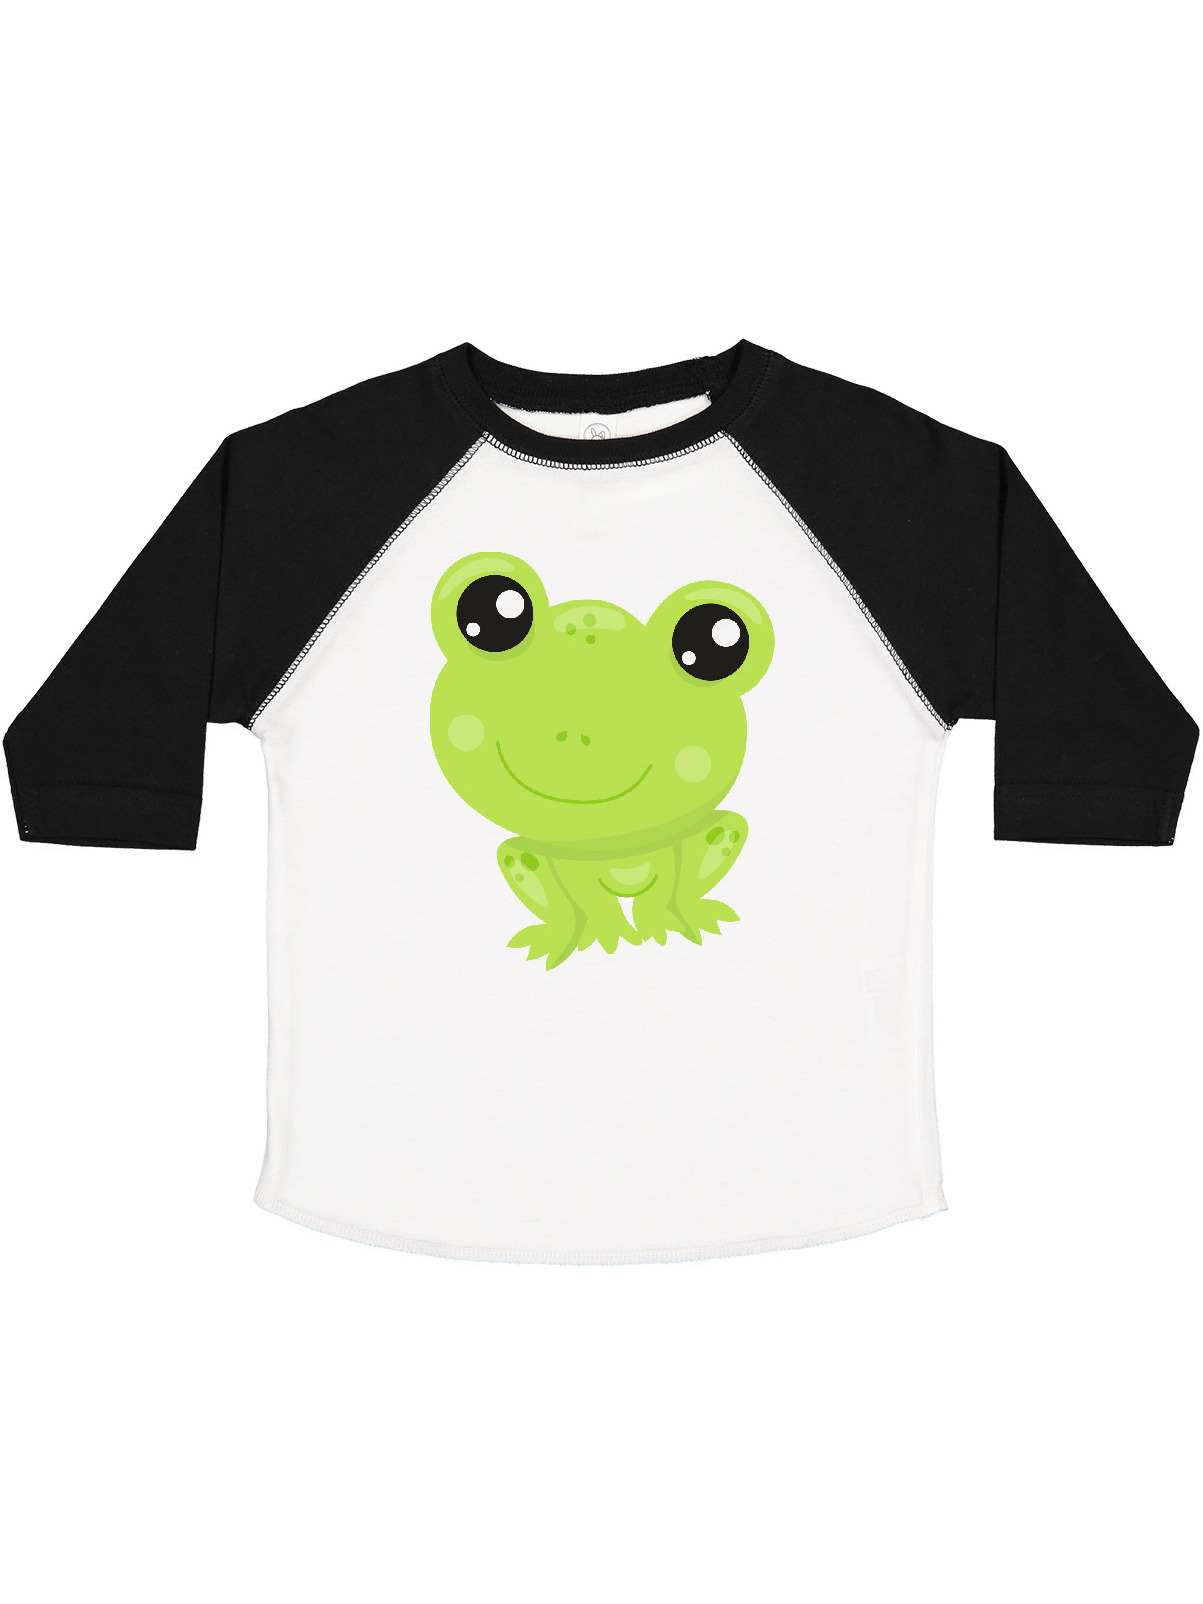 Inktastic Cute Frog, Little Frog, Baby Frog, Green Frog Boys or Girls Toddler T-Shirt - image 1 of 4